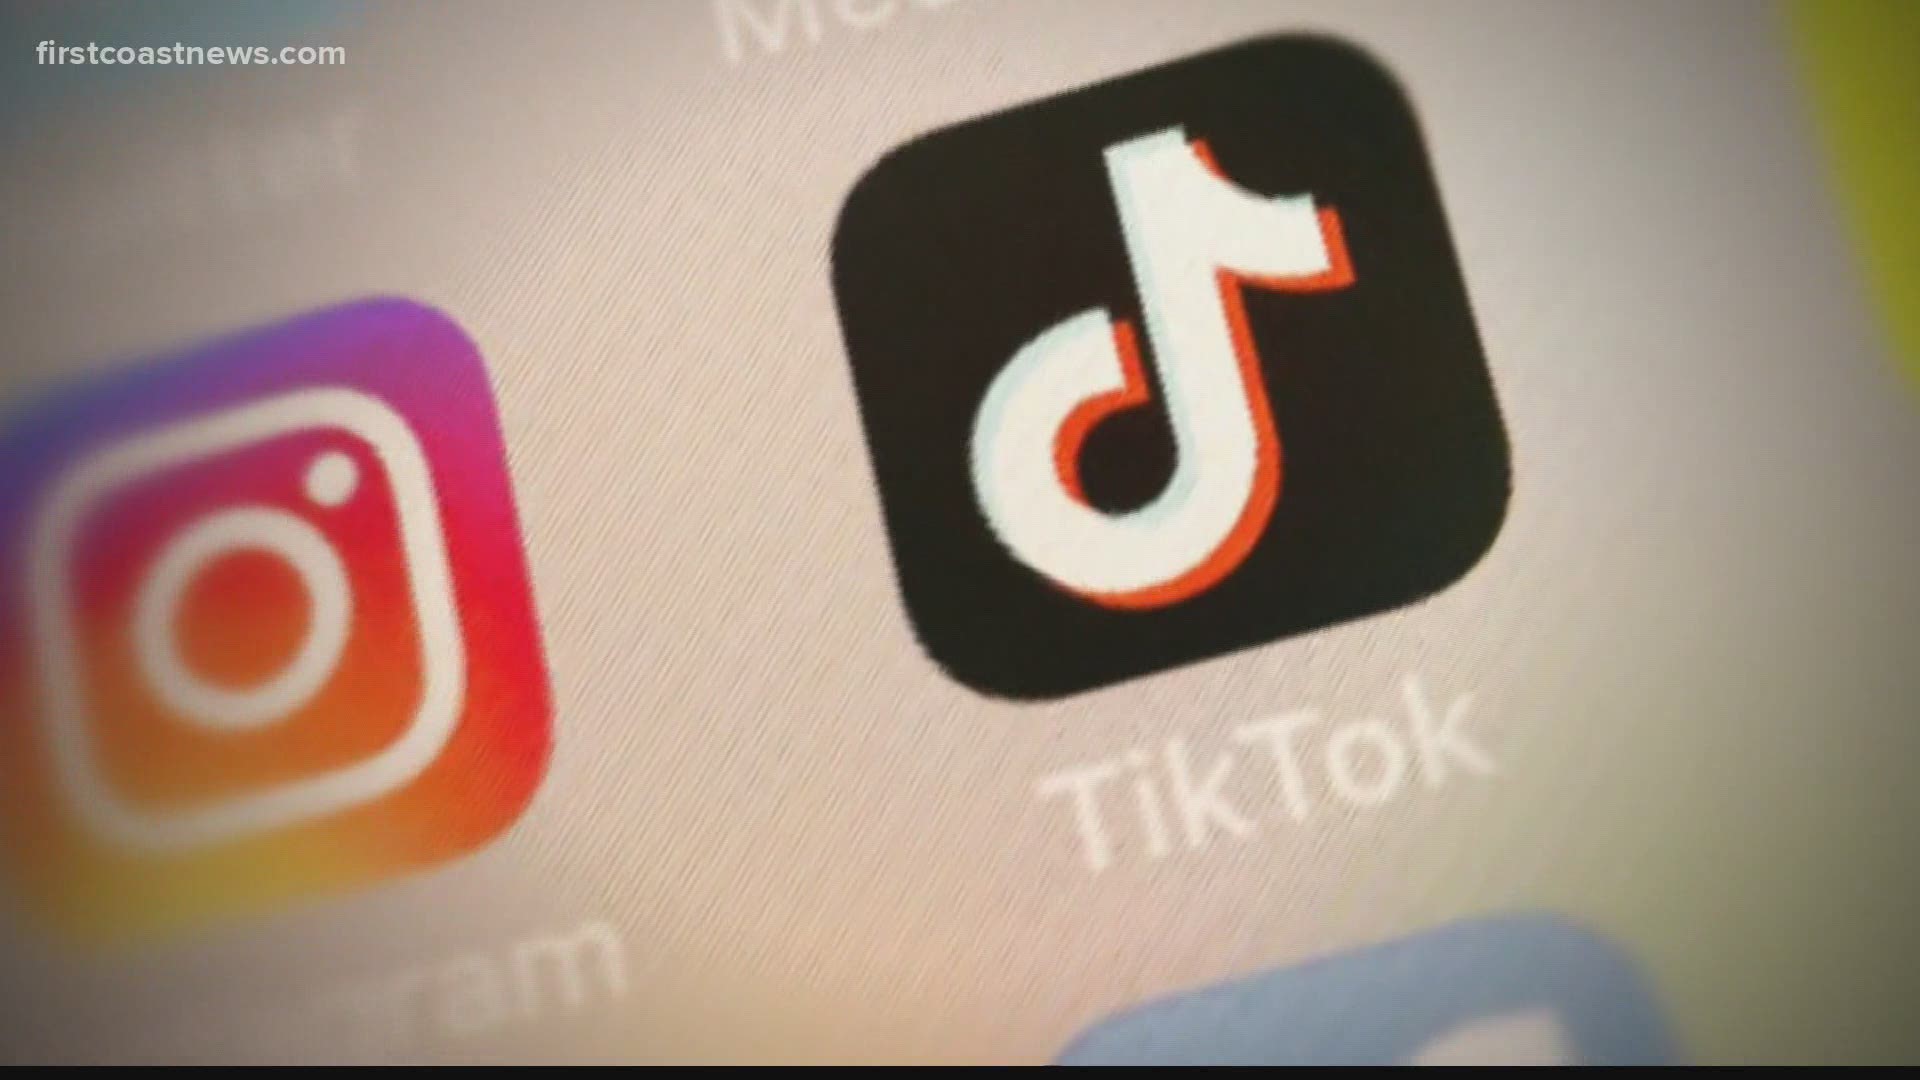 9NEWS Legal Expert Whitney Traylor explains the U.S. ban on Tik Tok and WeChat.